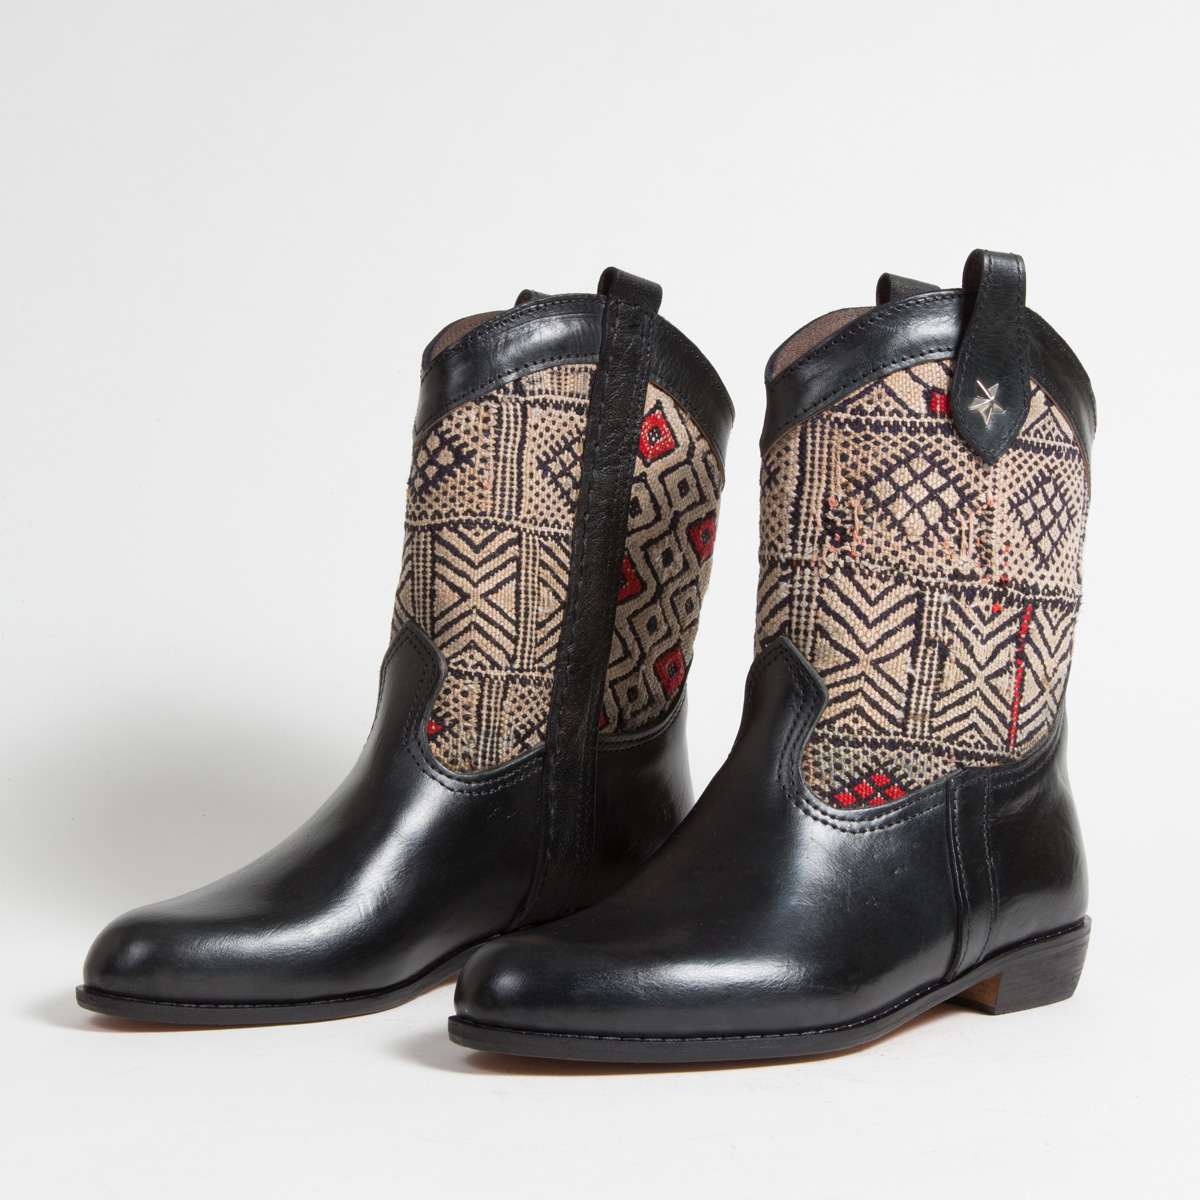 Bottines Kilim cuir mababouche artisanales (Réf. MN14-41)